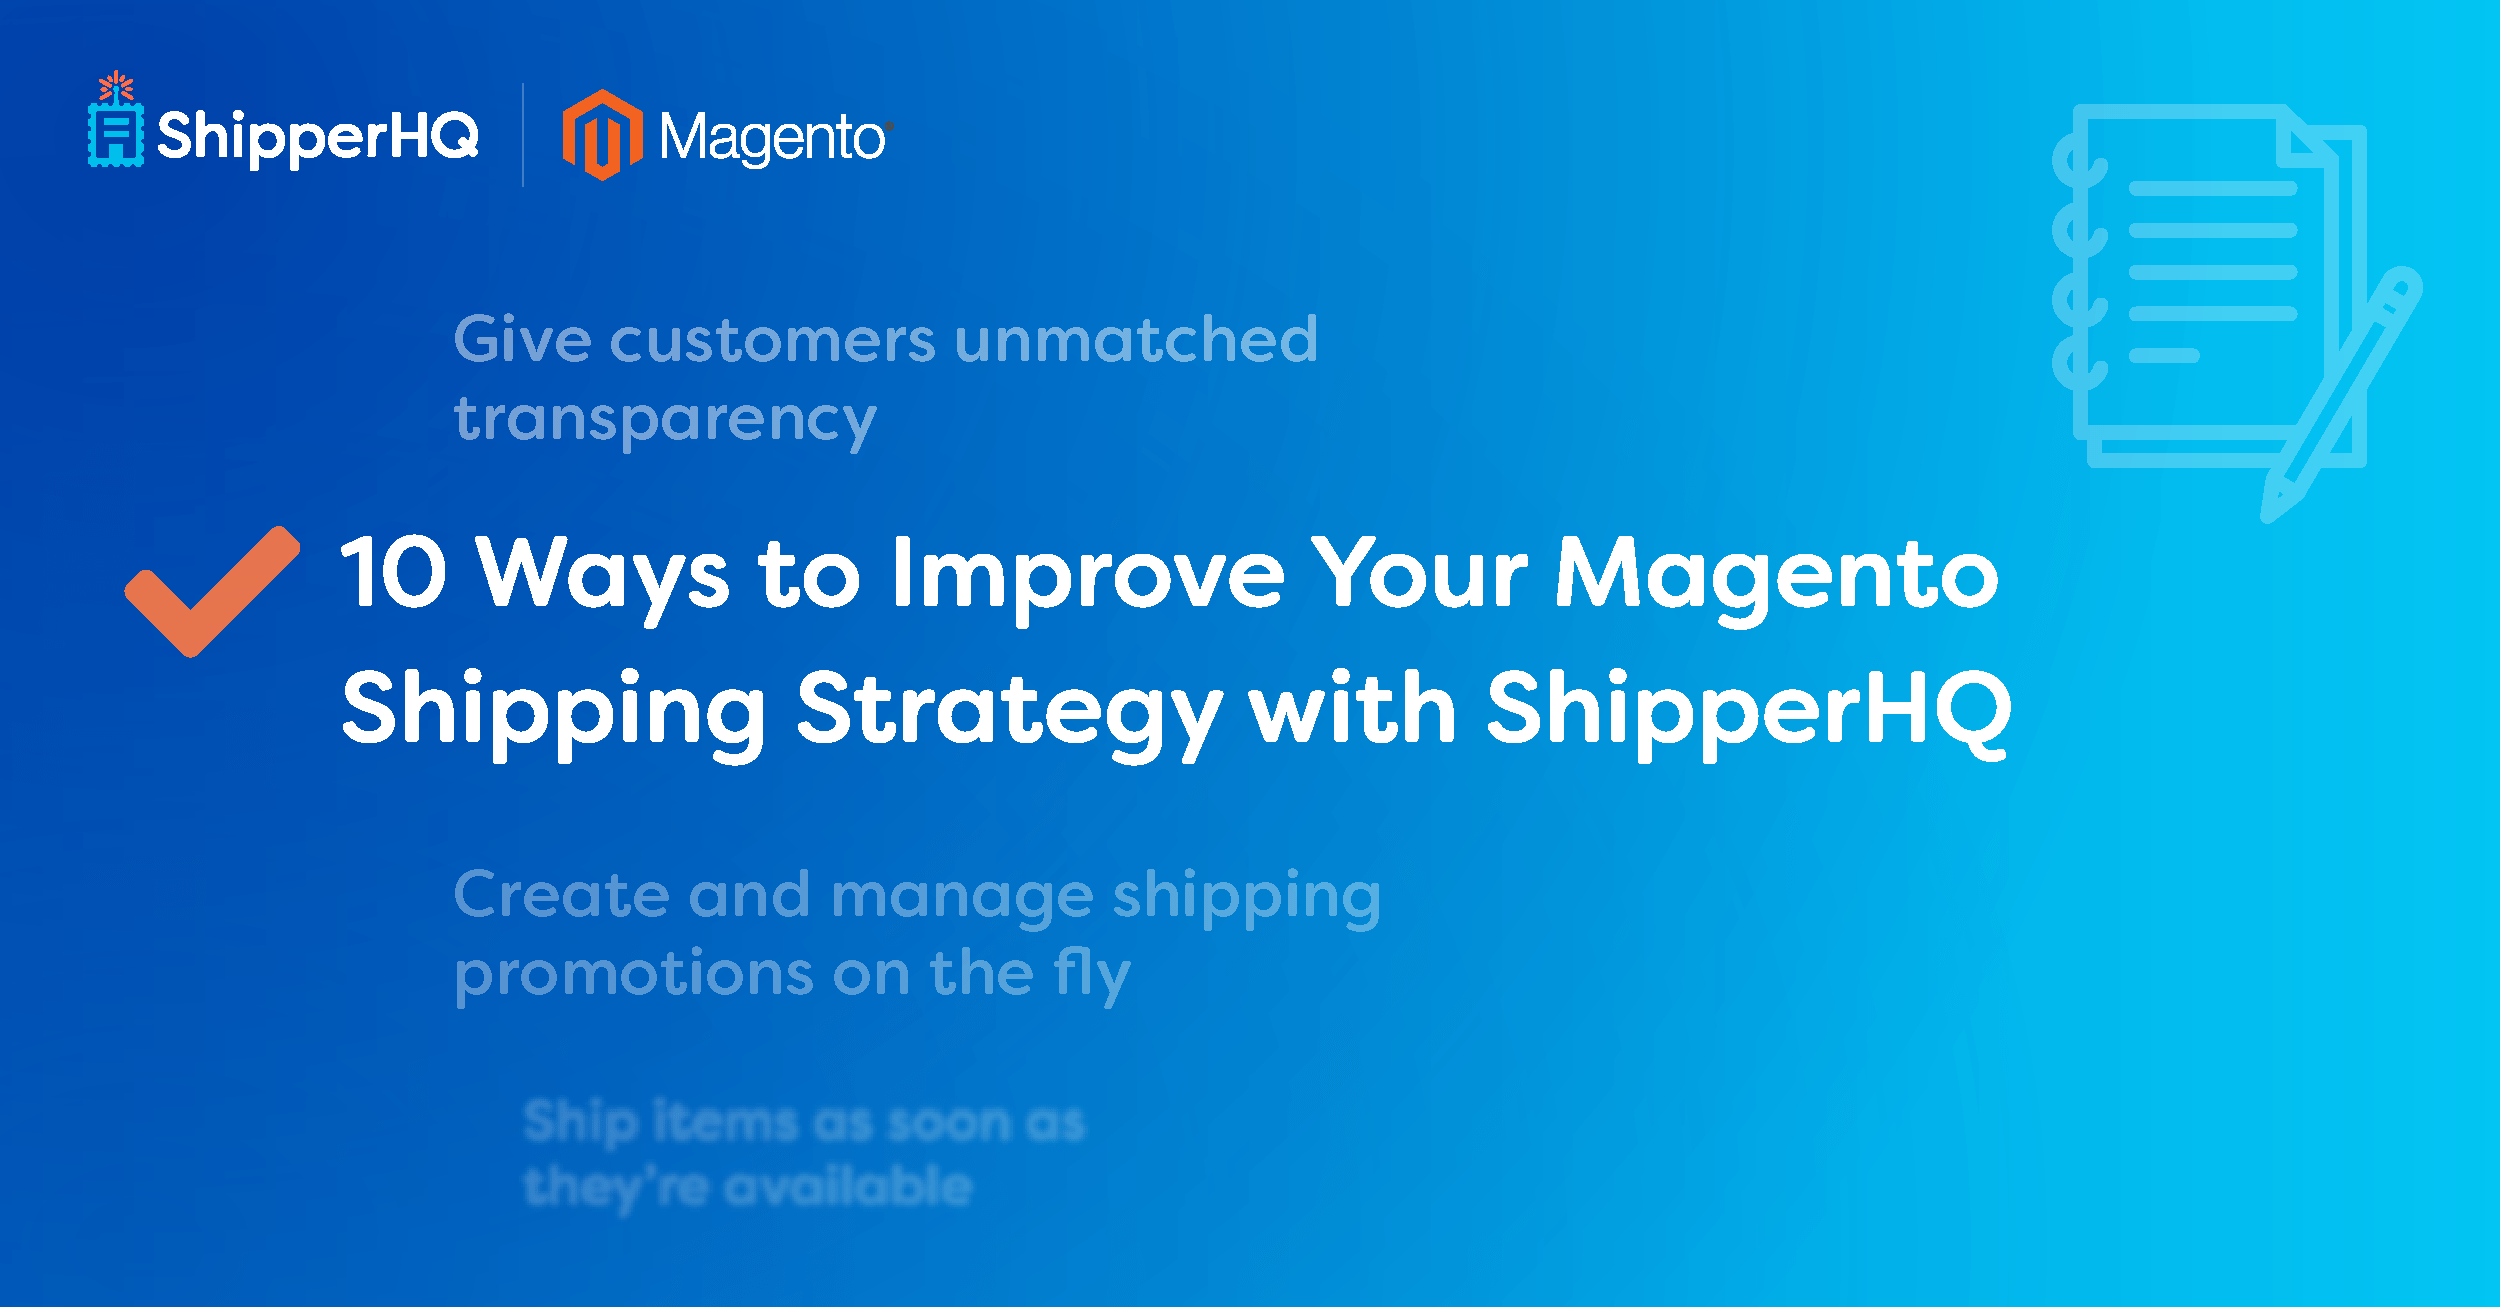 10 Ways ShipperHQ Improves Your Magento Shipping Strategy